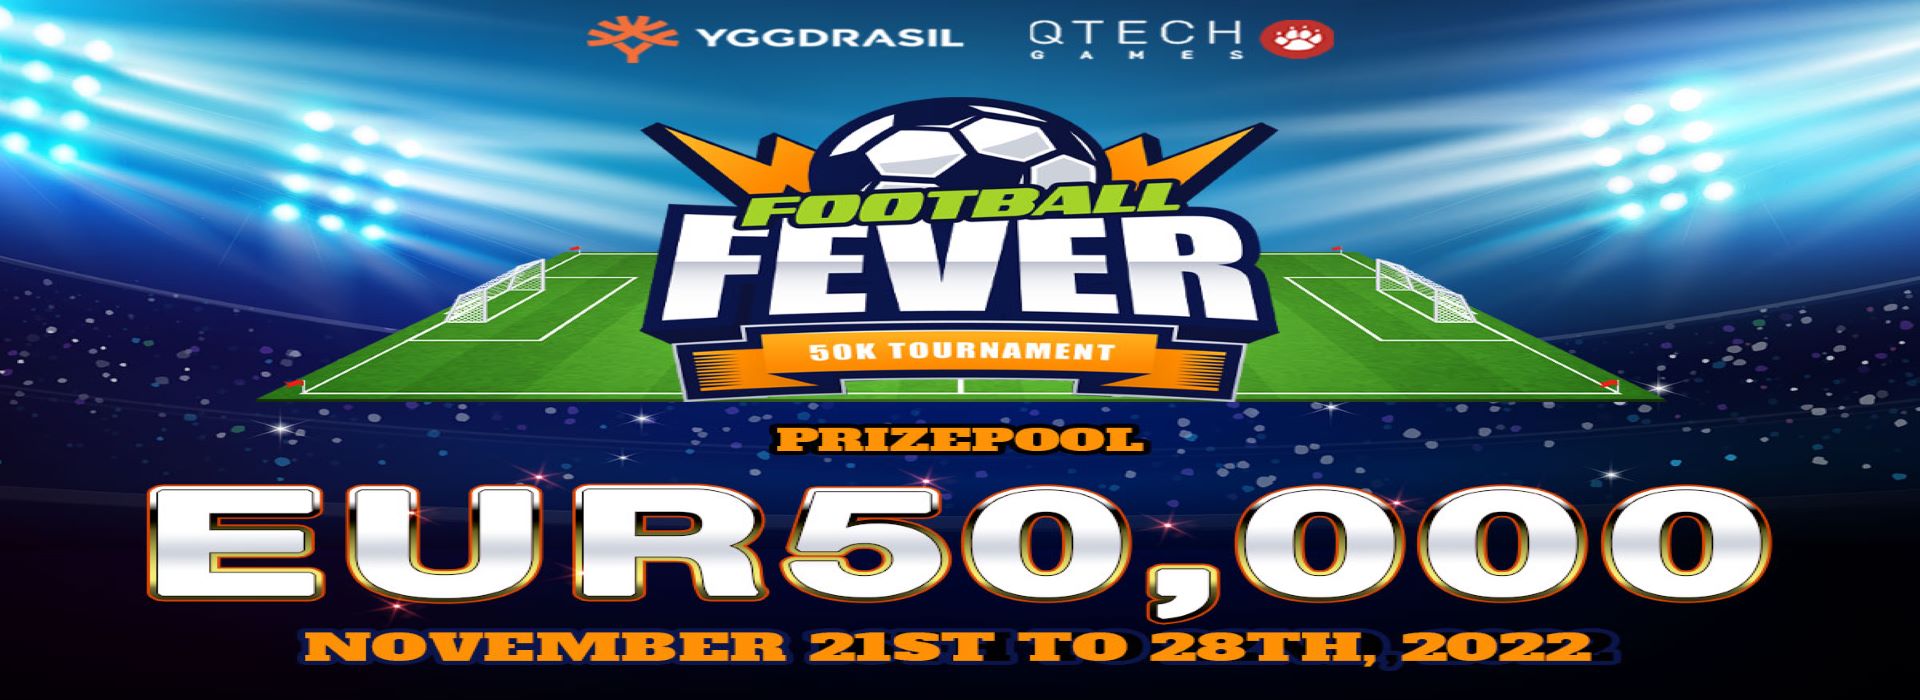 There’s only one goal, WIN!!! Yggdrasil invites you to join the fun and excitement of the “Football Fever” network tournament.